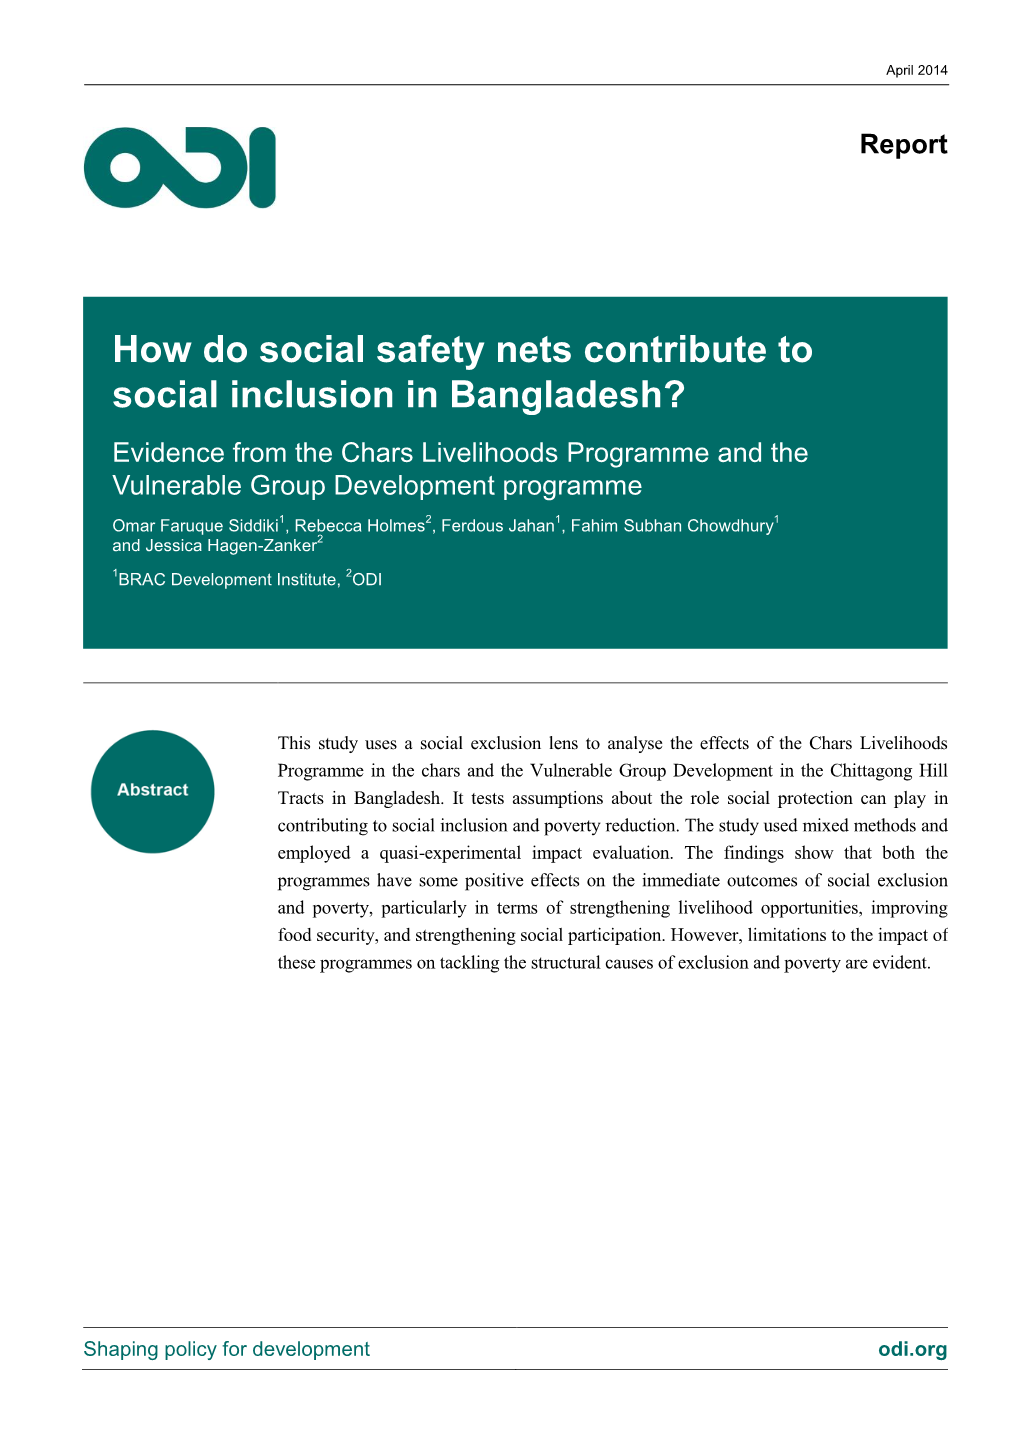 How Do Social Safety Nets Contribute to Social Inclusion in Bangladesh? Evidence from the Chars Livelihoods Programme and the Vulnerable Group Development Programme